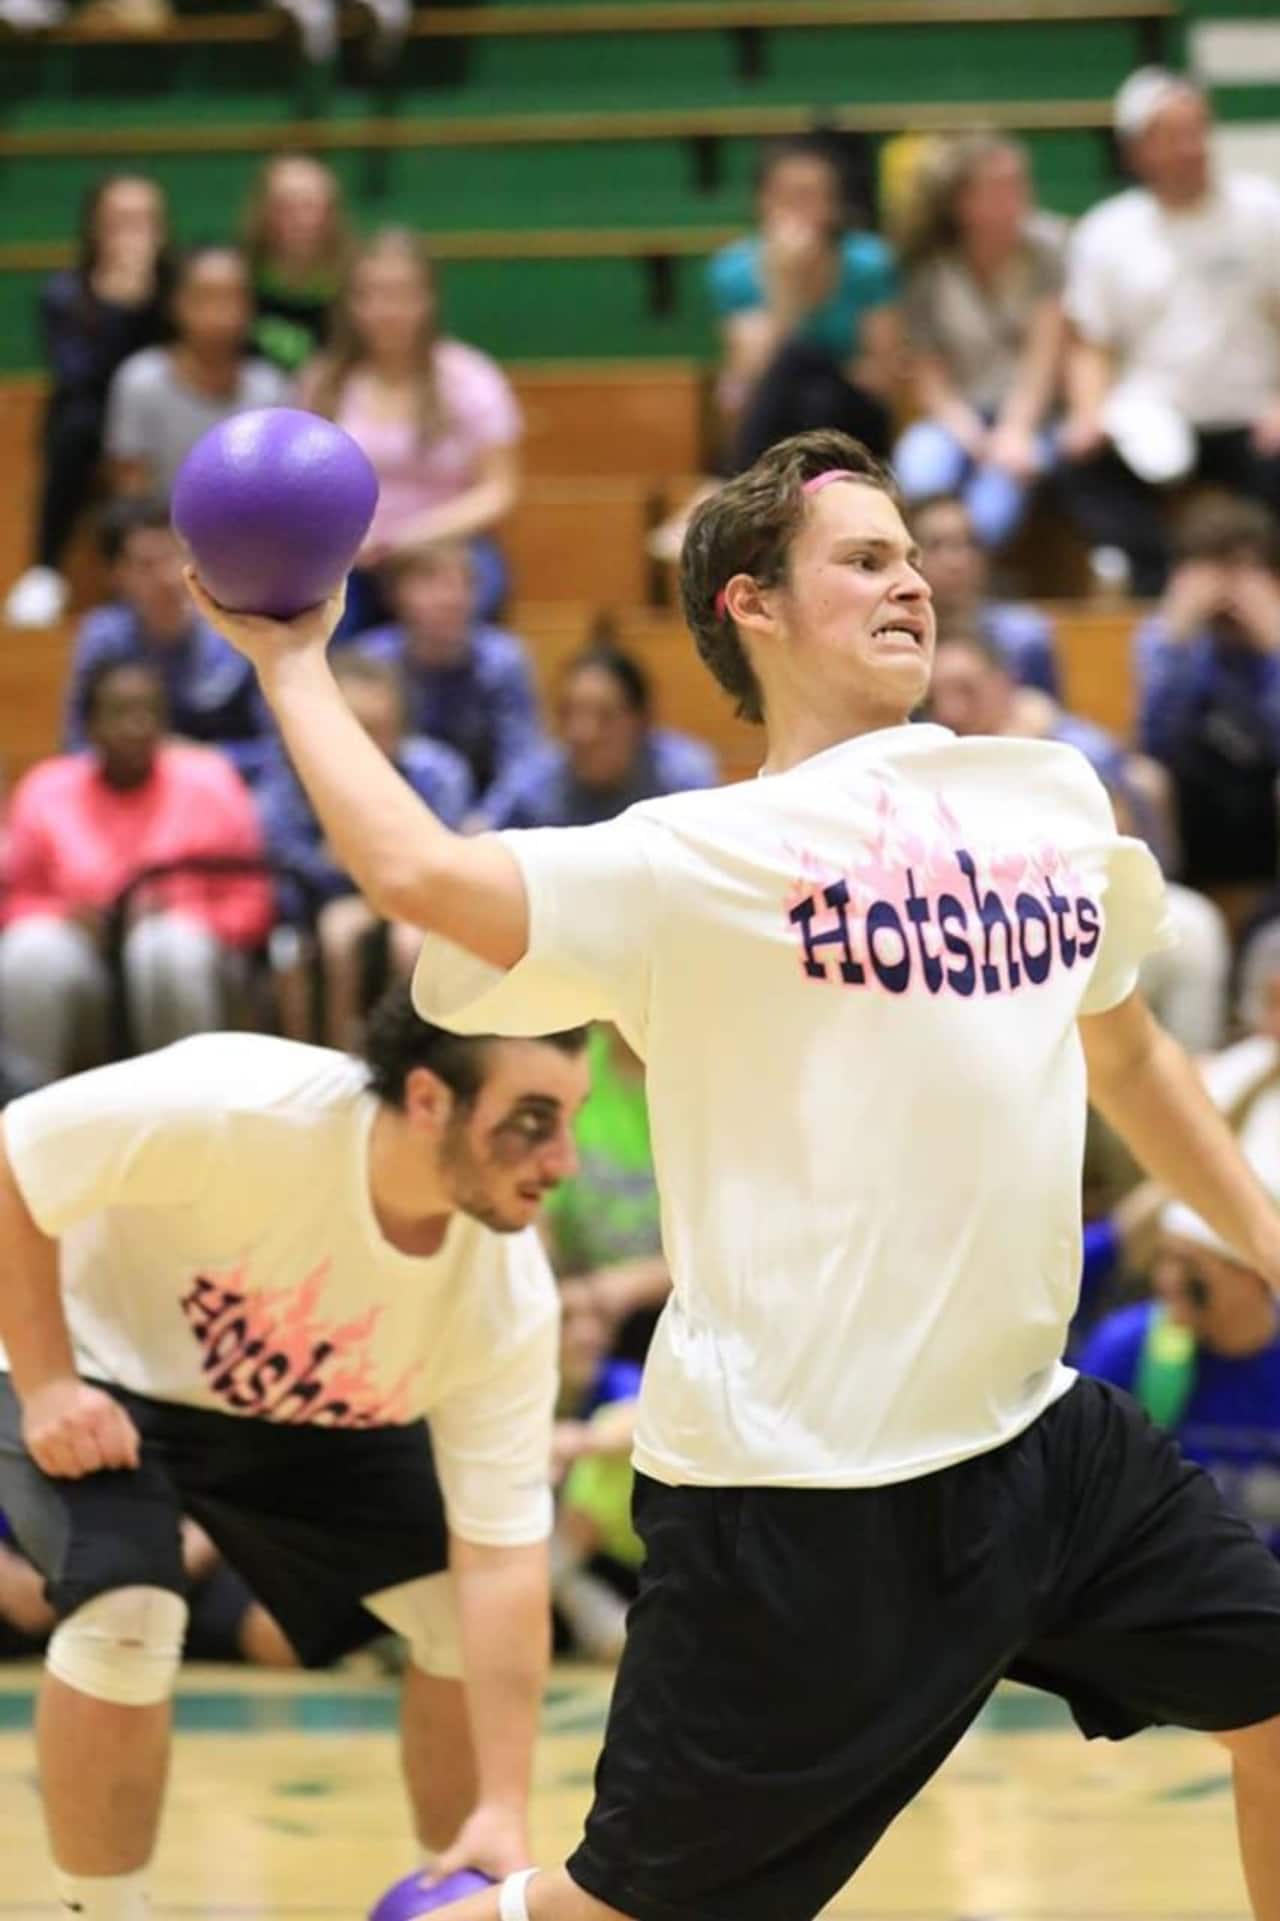 A Norwalk student gets ready to fire at a Dodgeball fundraiser event last year at Norwalk High School.